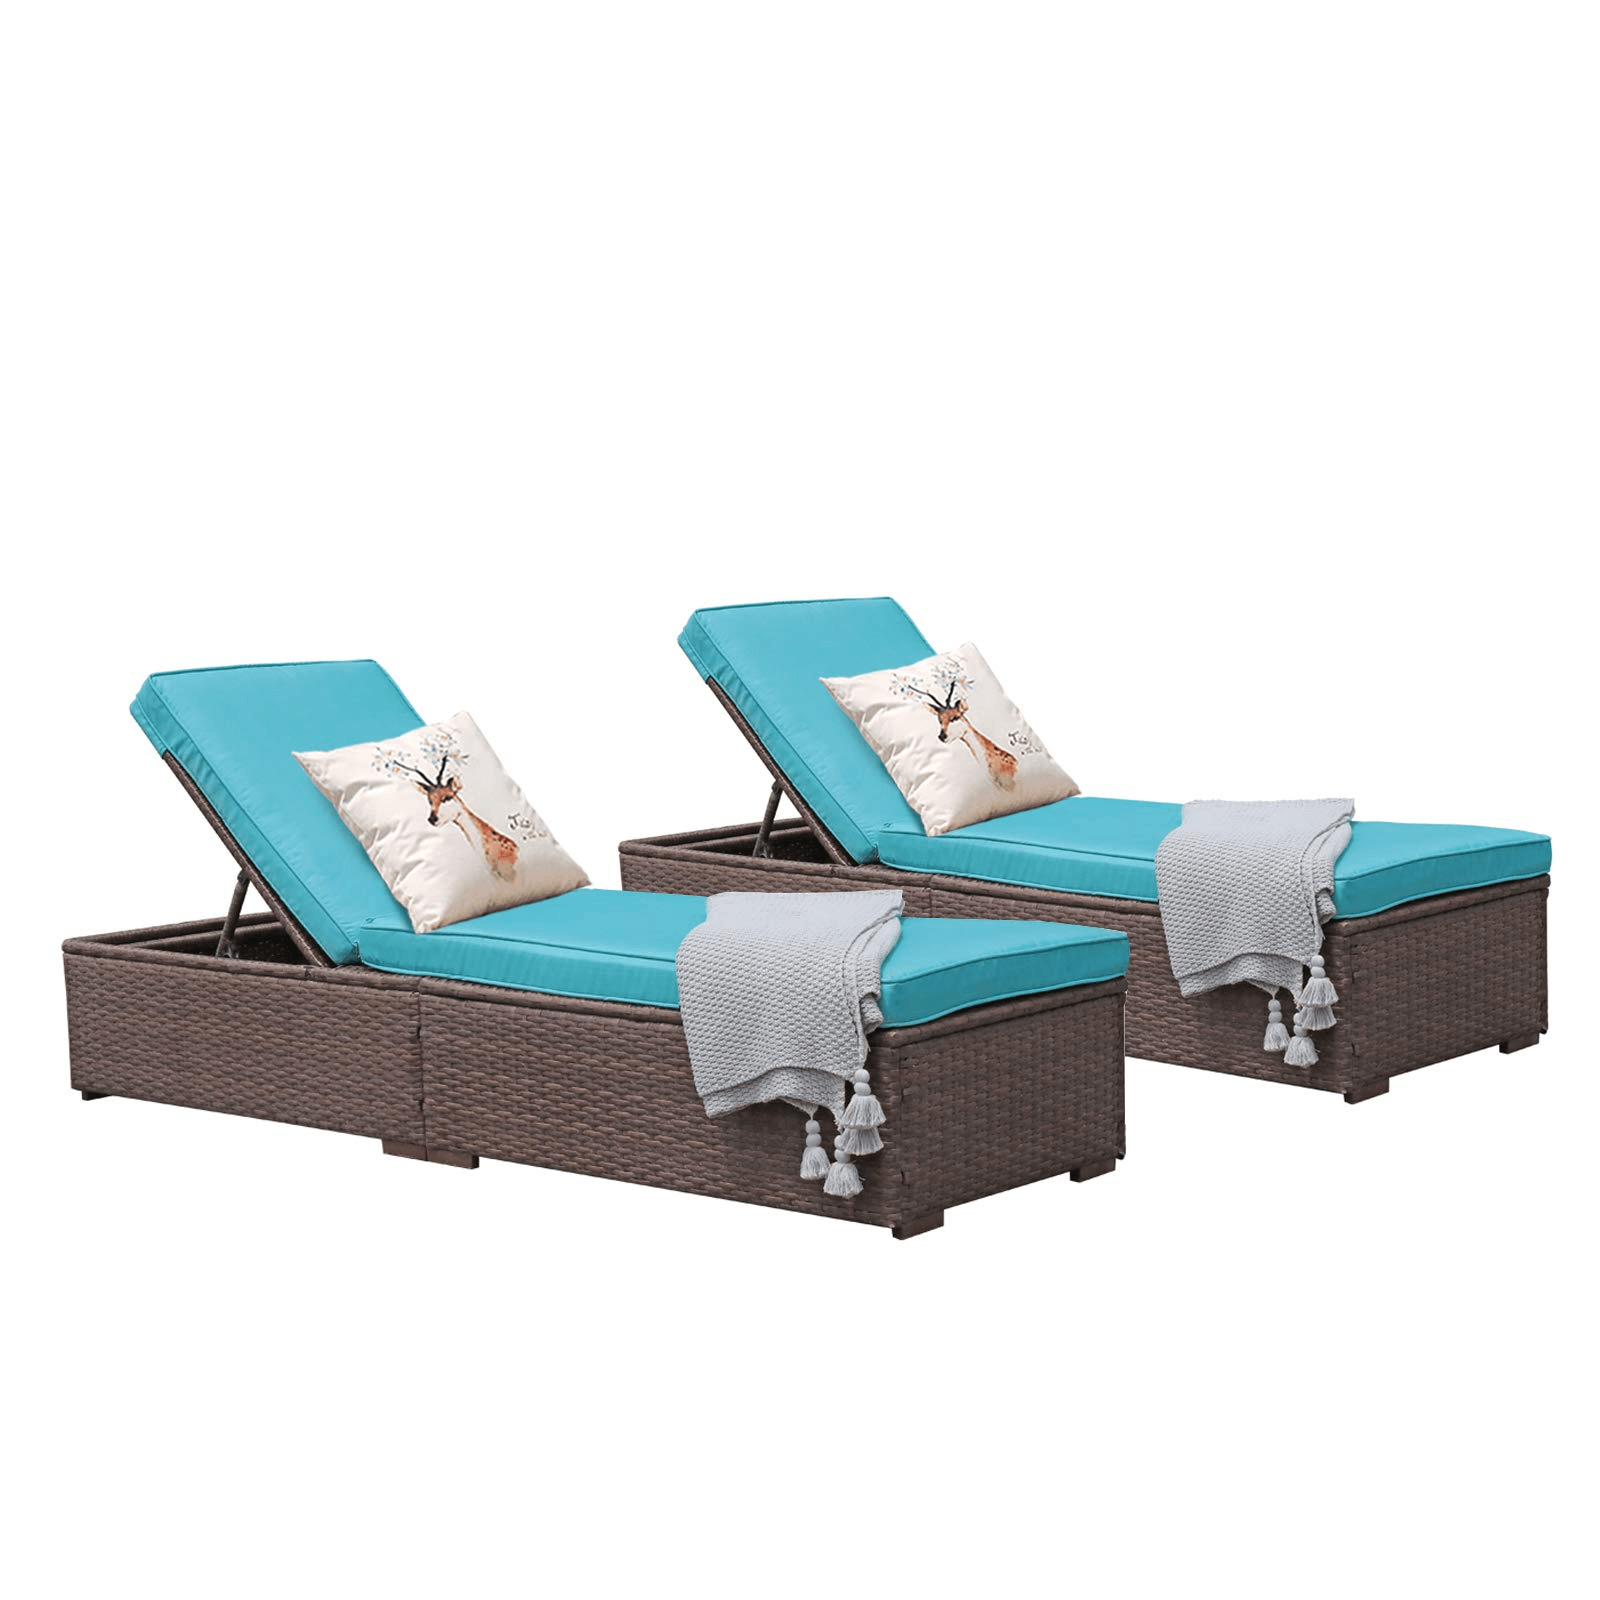 2pcs Patio Lounge Chairs Wicker Outdoor Loungers with Turquoise Cushions, Rectangle Shape | Orange-Casual